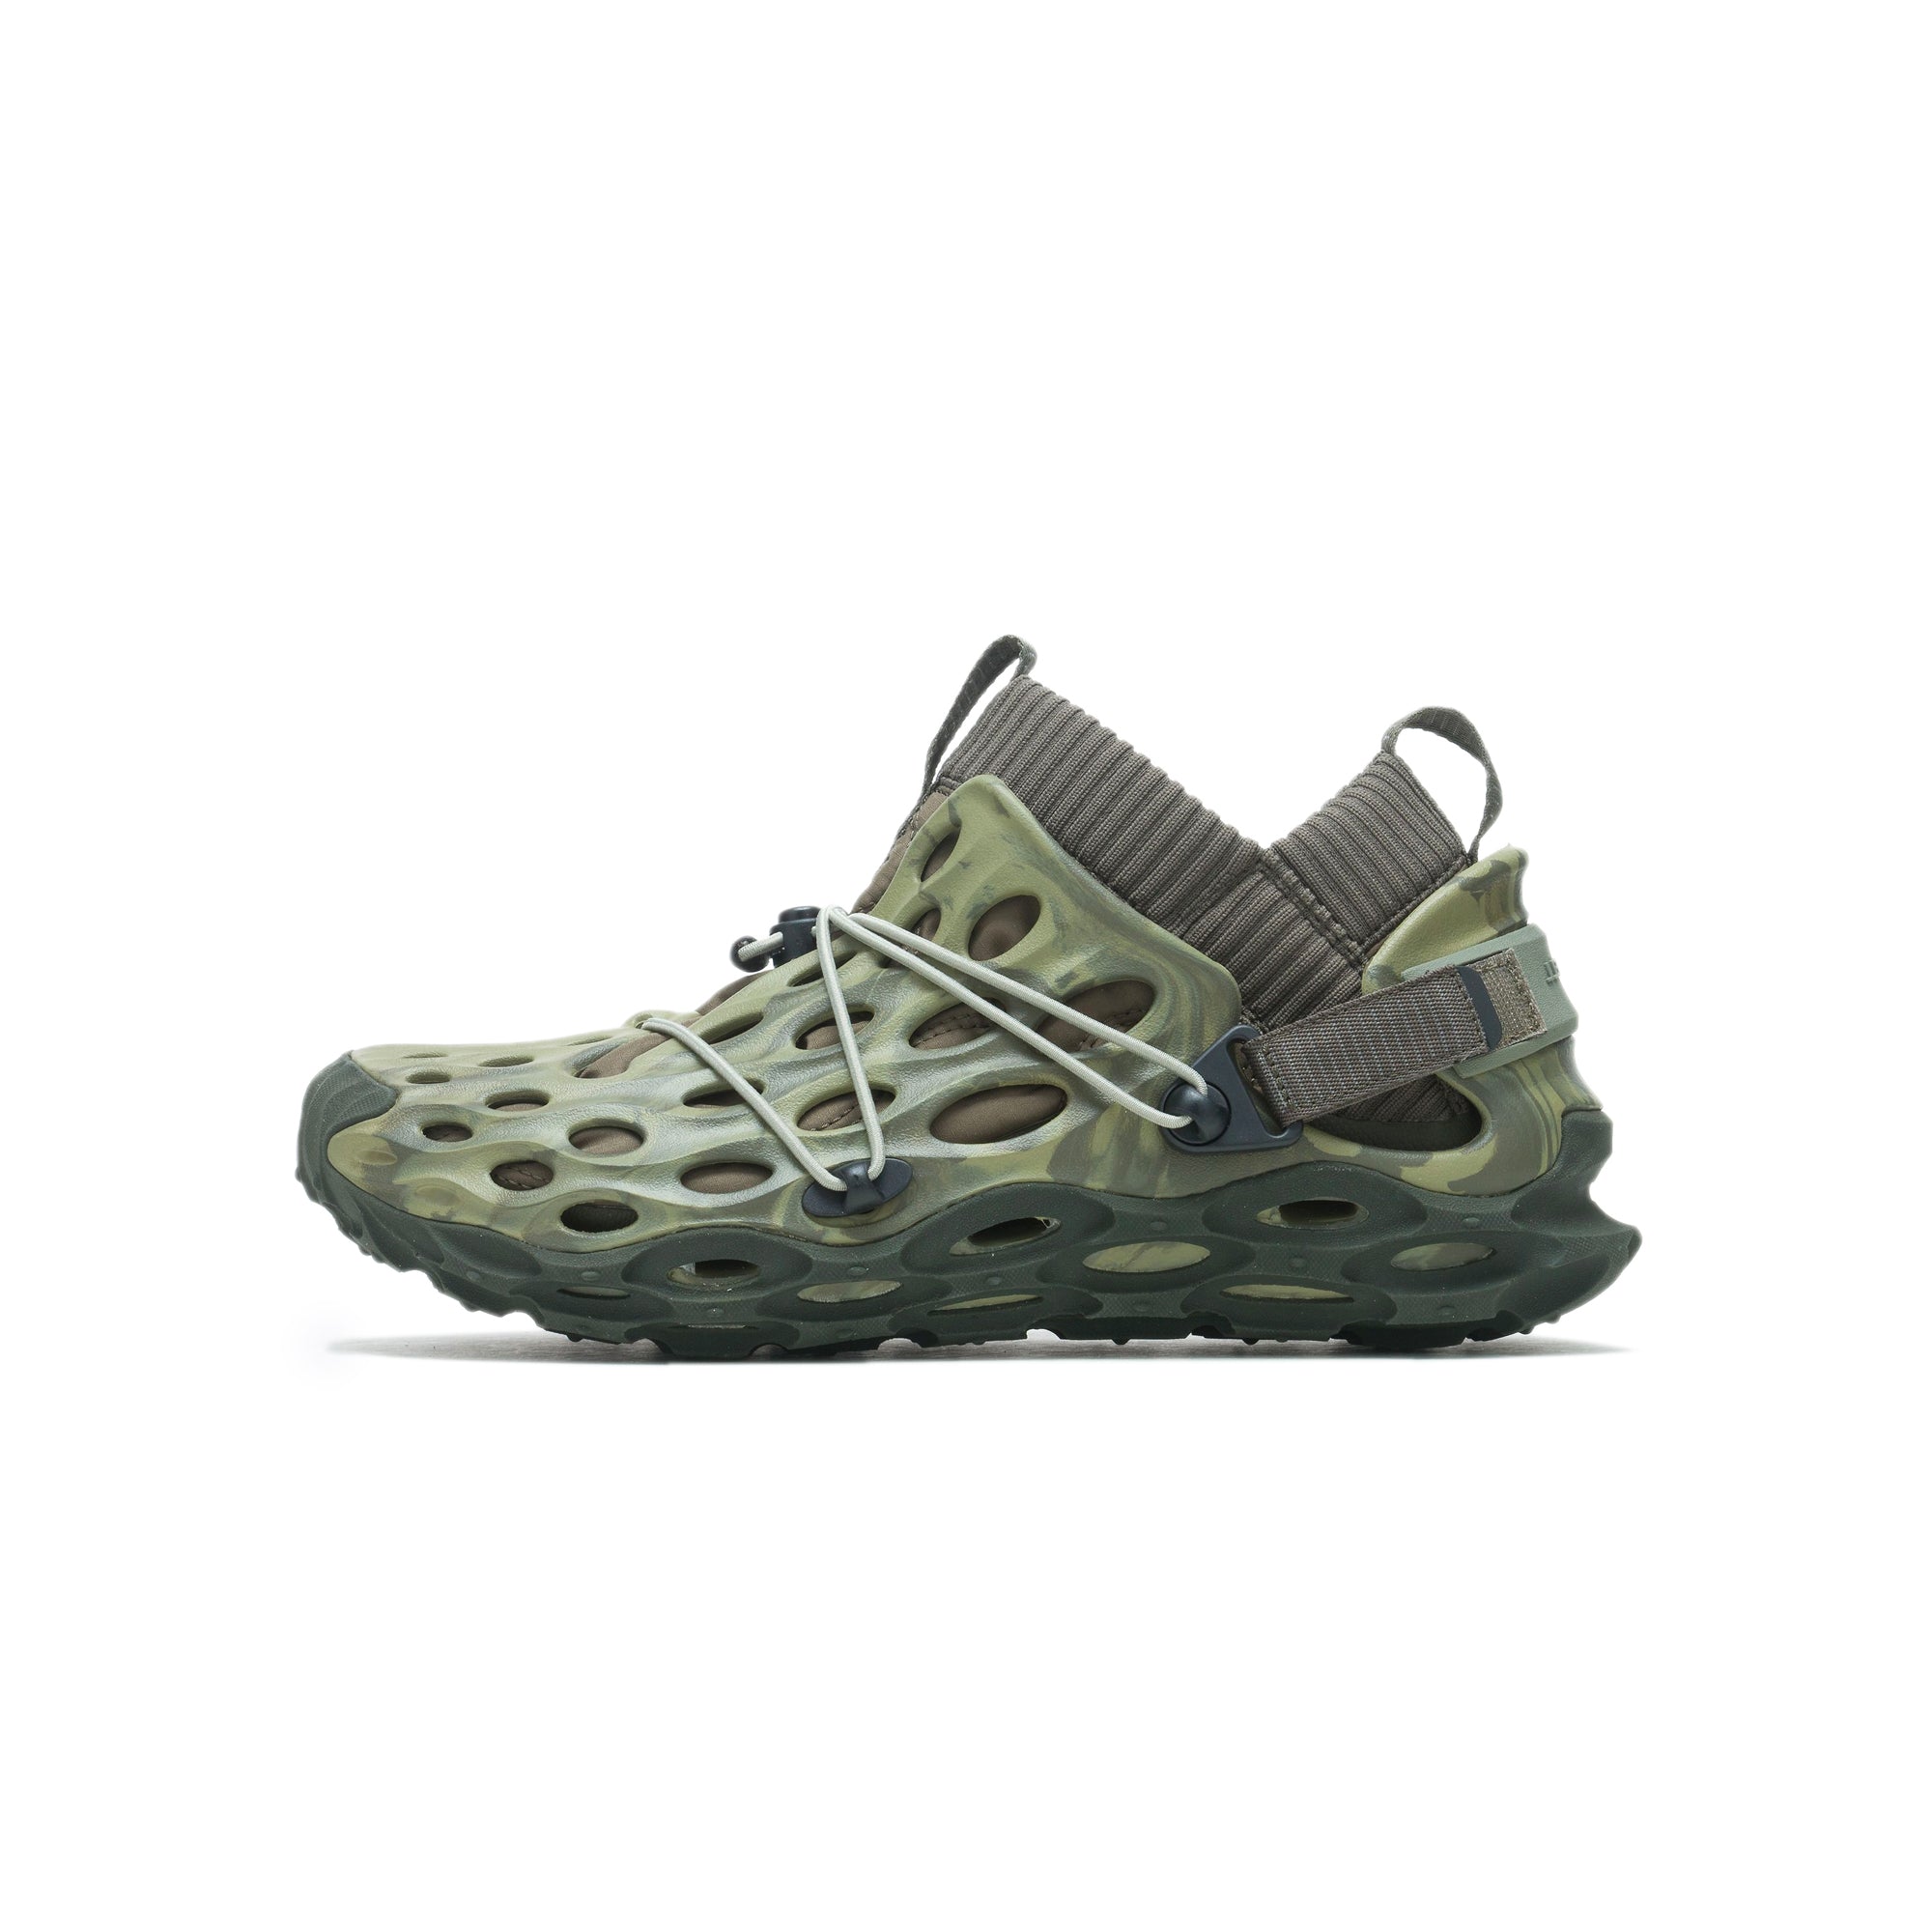 Merrell Mens Hydro Moc At Ripstop 1 TRL Shoes